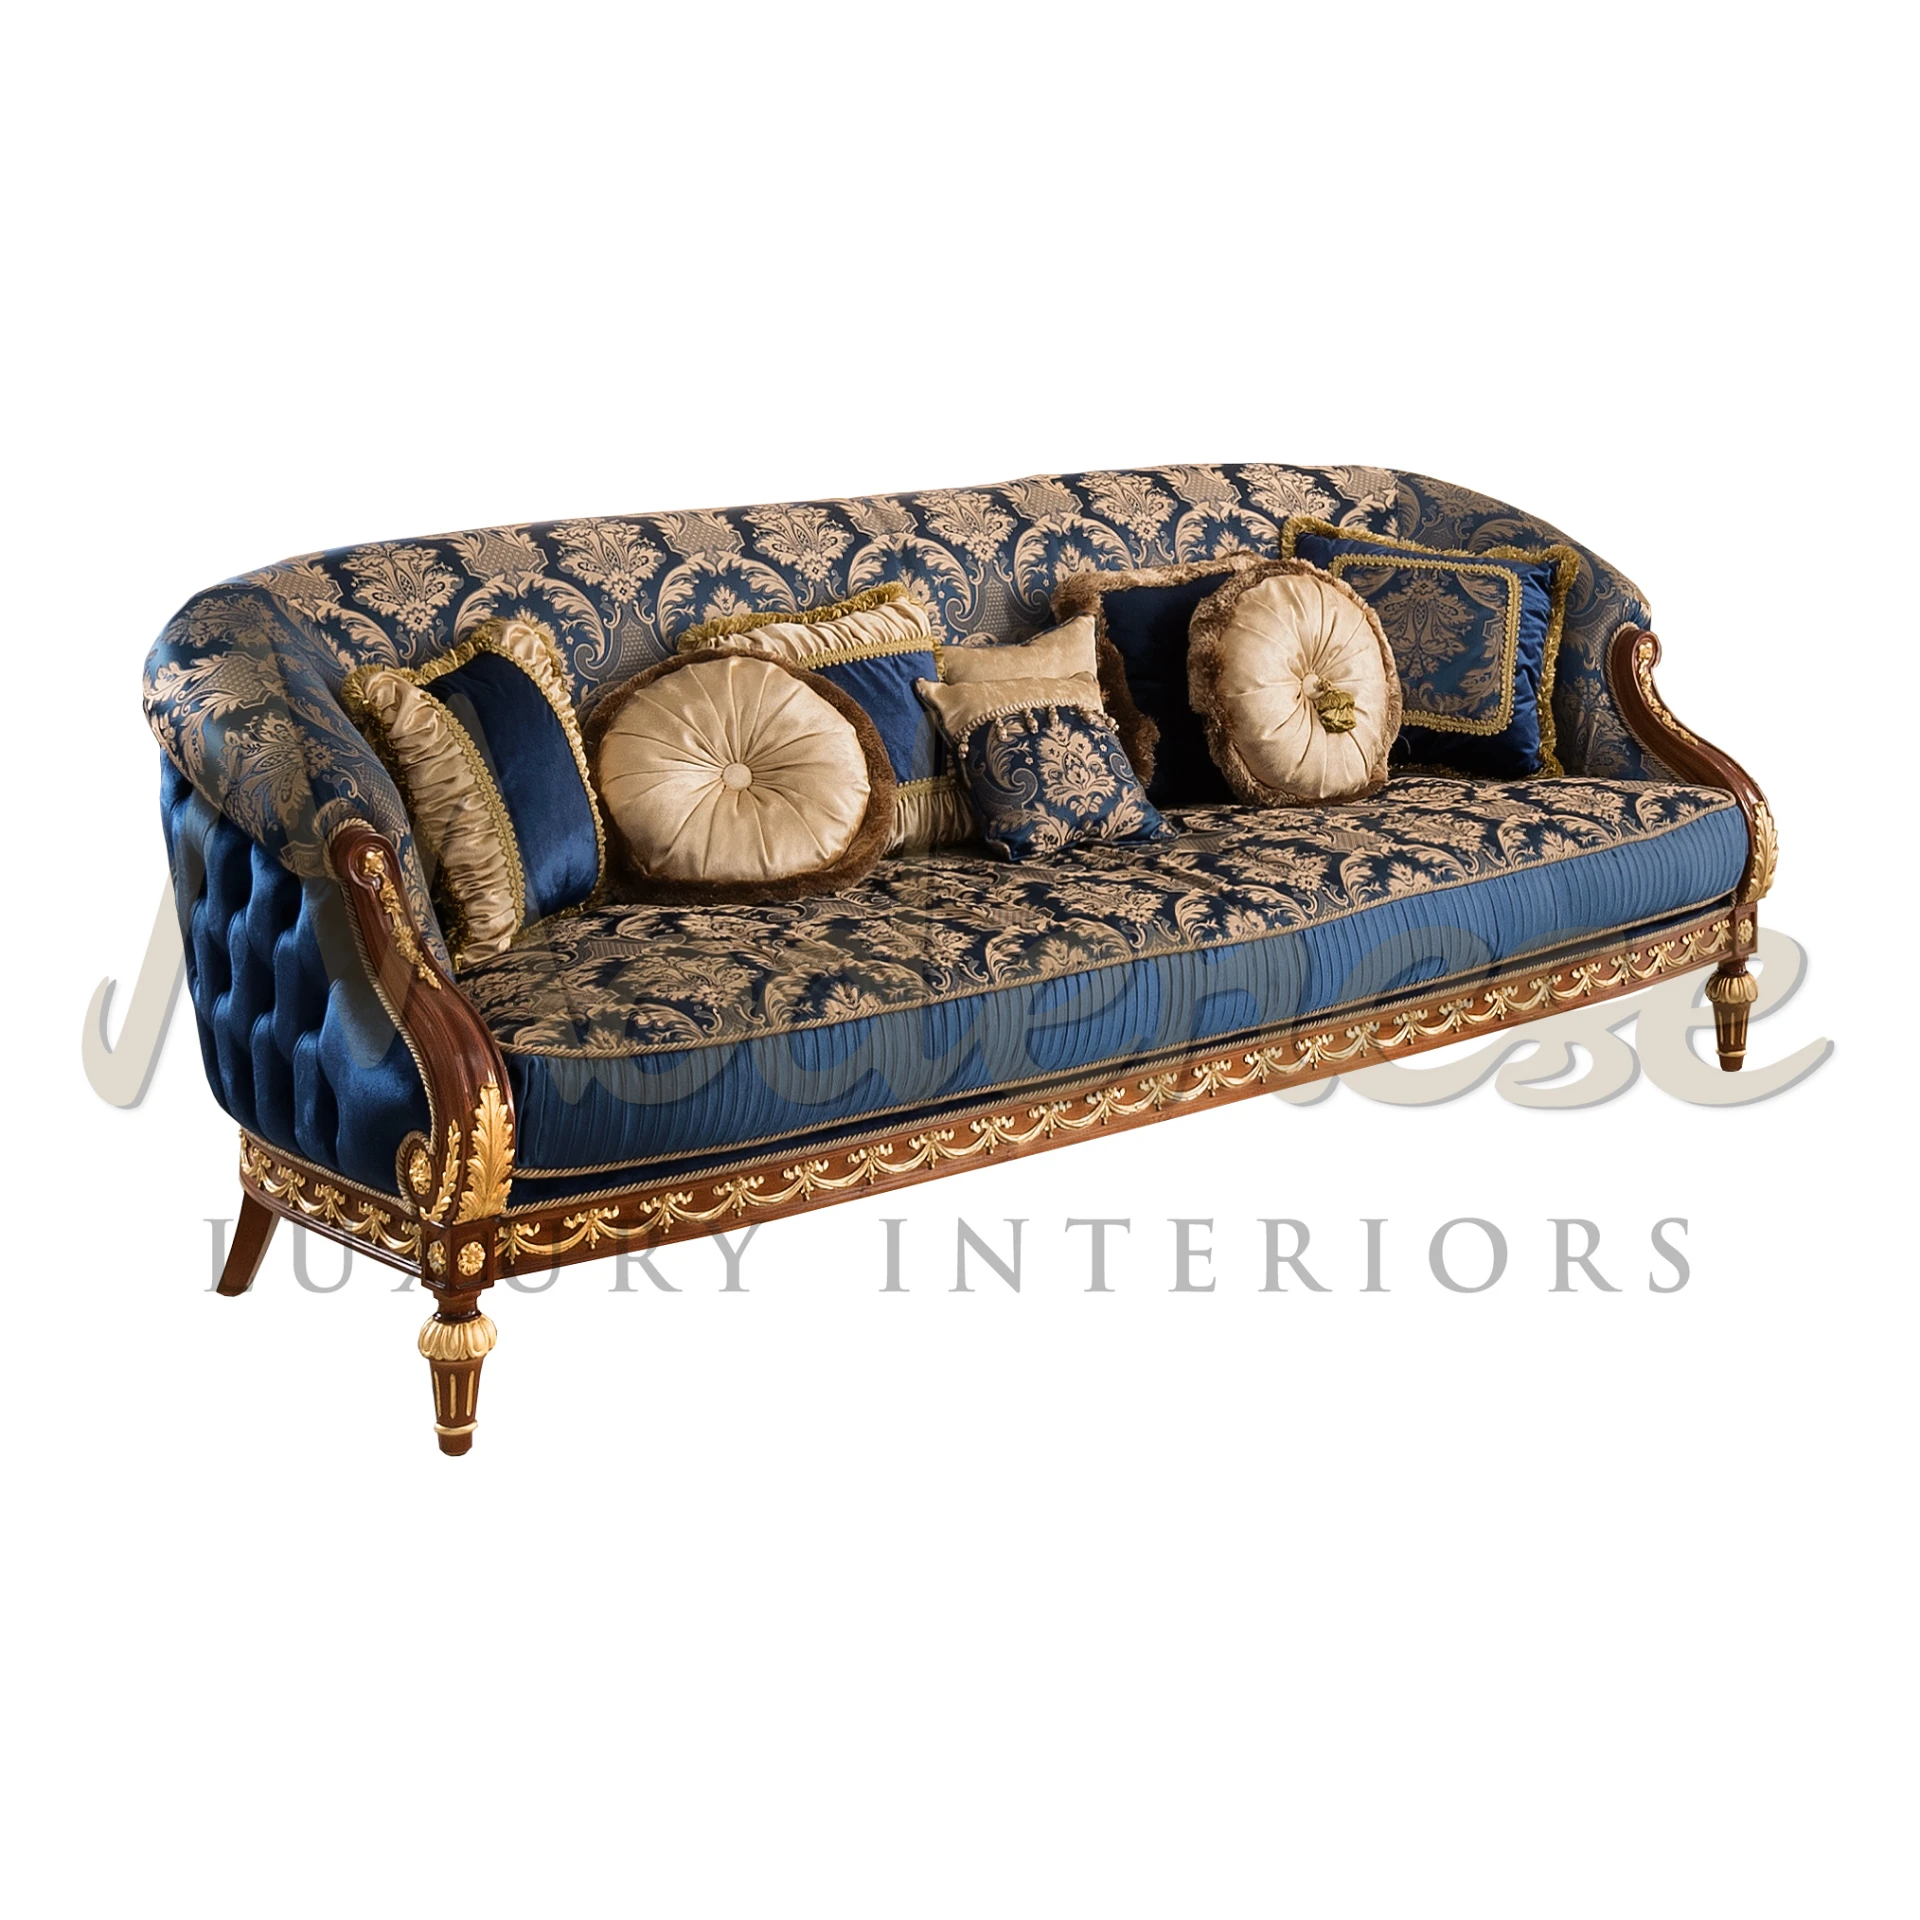 A luxurious sofa from Modenese Luxury Furniture, featuring ornate carvings and plush upholstery. Ideal for upscale living spaces and luxury interiors.